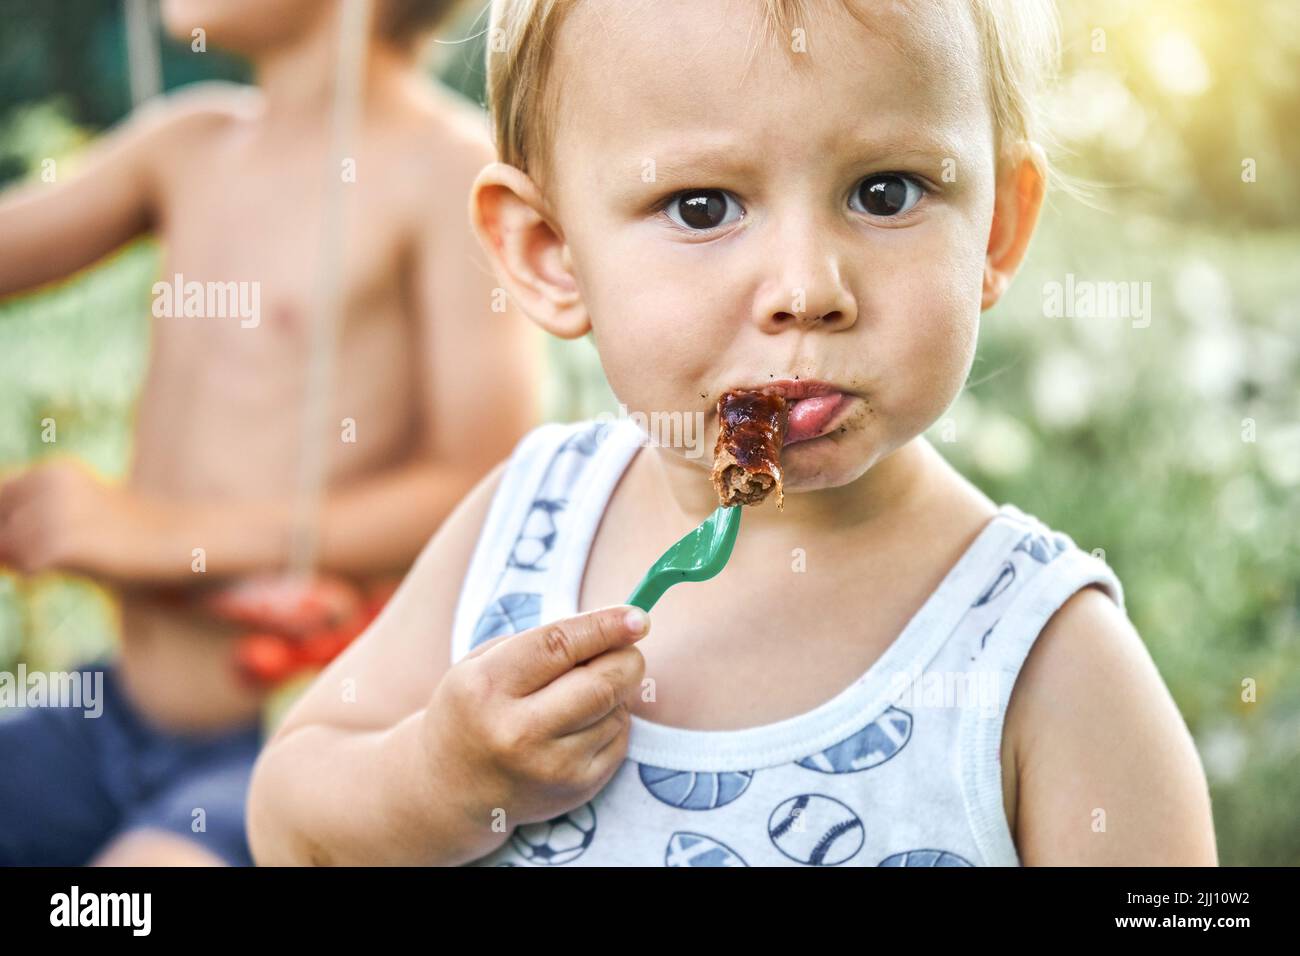 Cute blond toddler boy eats barbecue sausage with plastic fork on blurred background. Portrait of little boy with dark brown eyes at picnic on nature Stock Photo